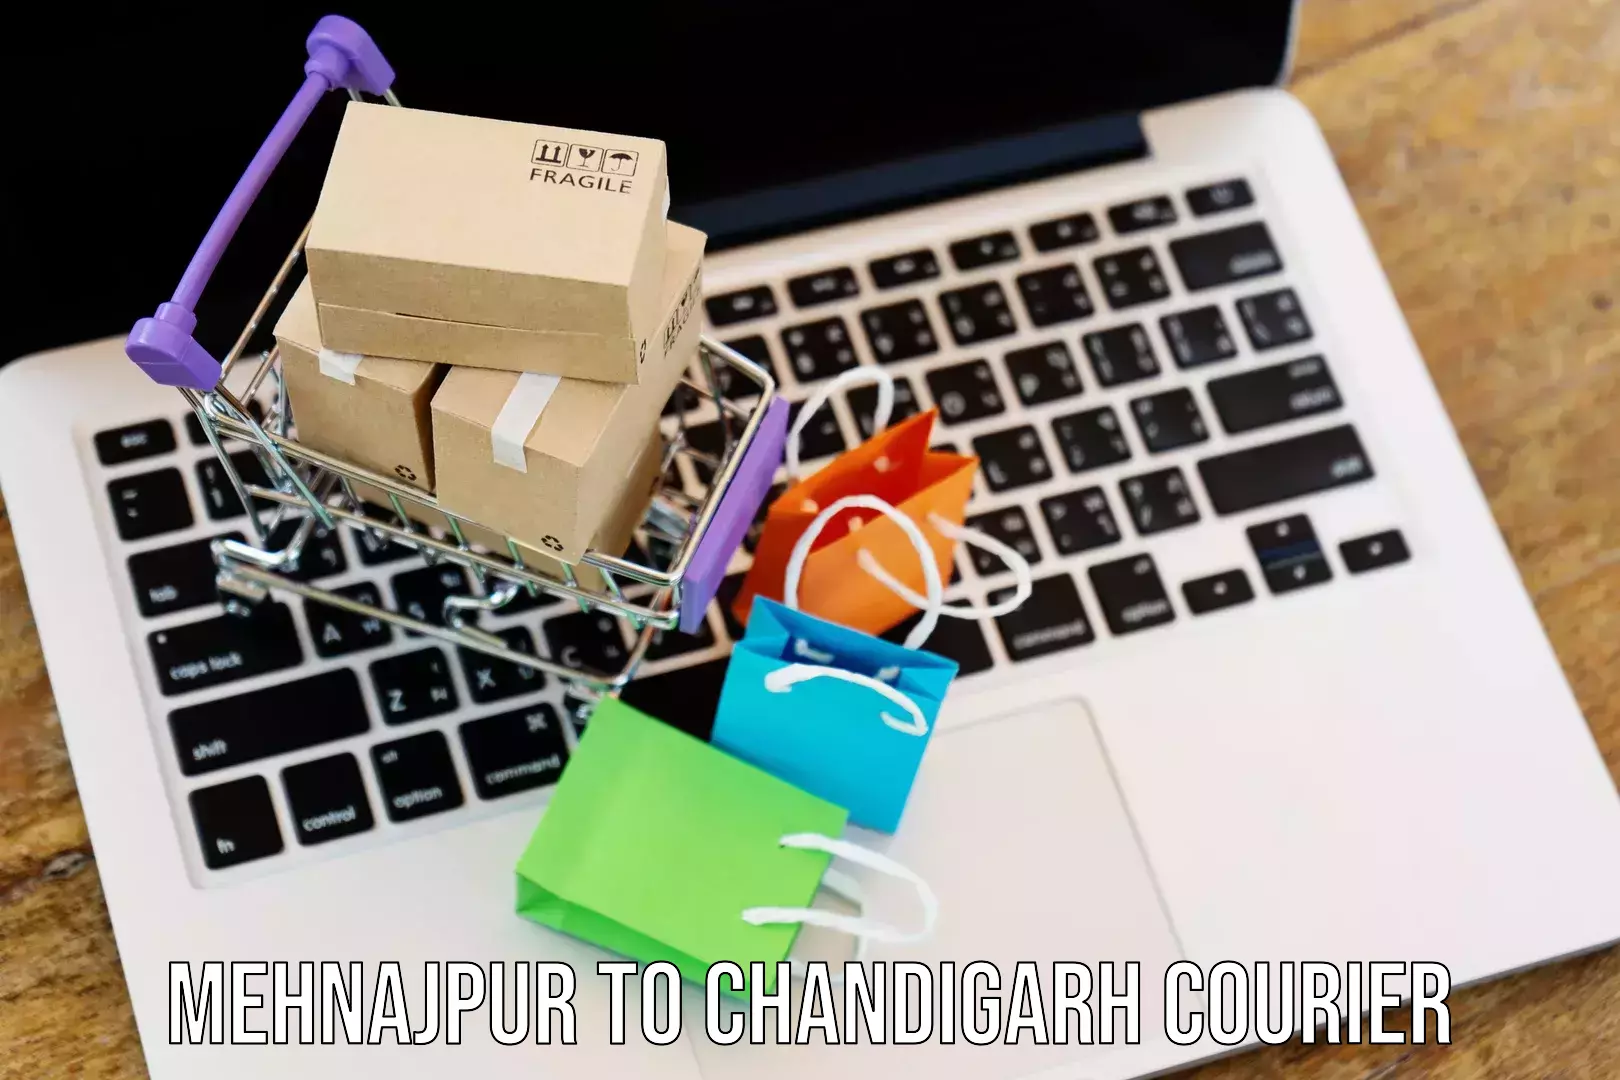 24-hour courier service Mehnajpur to Panjab University Chandigarh